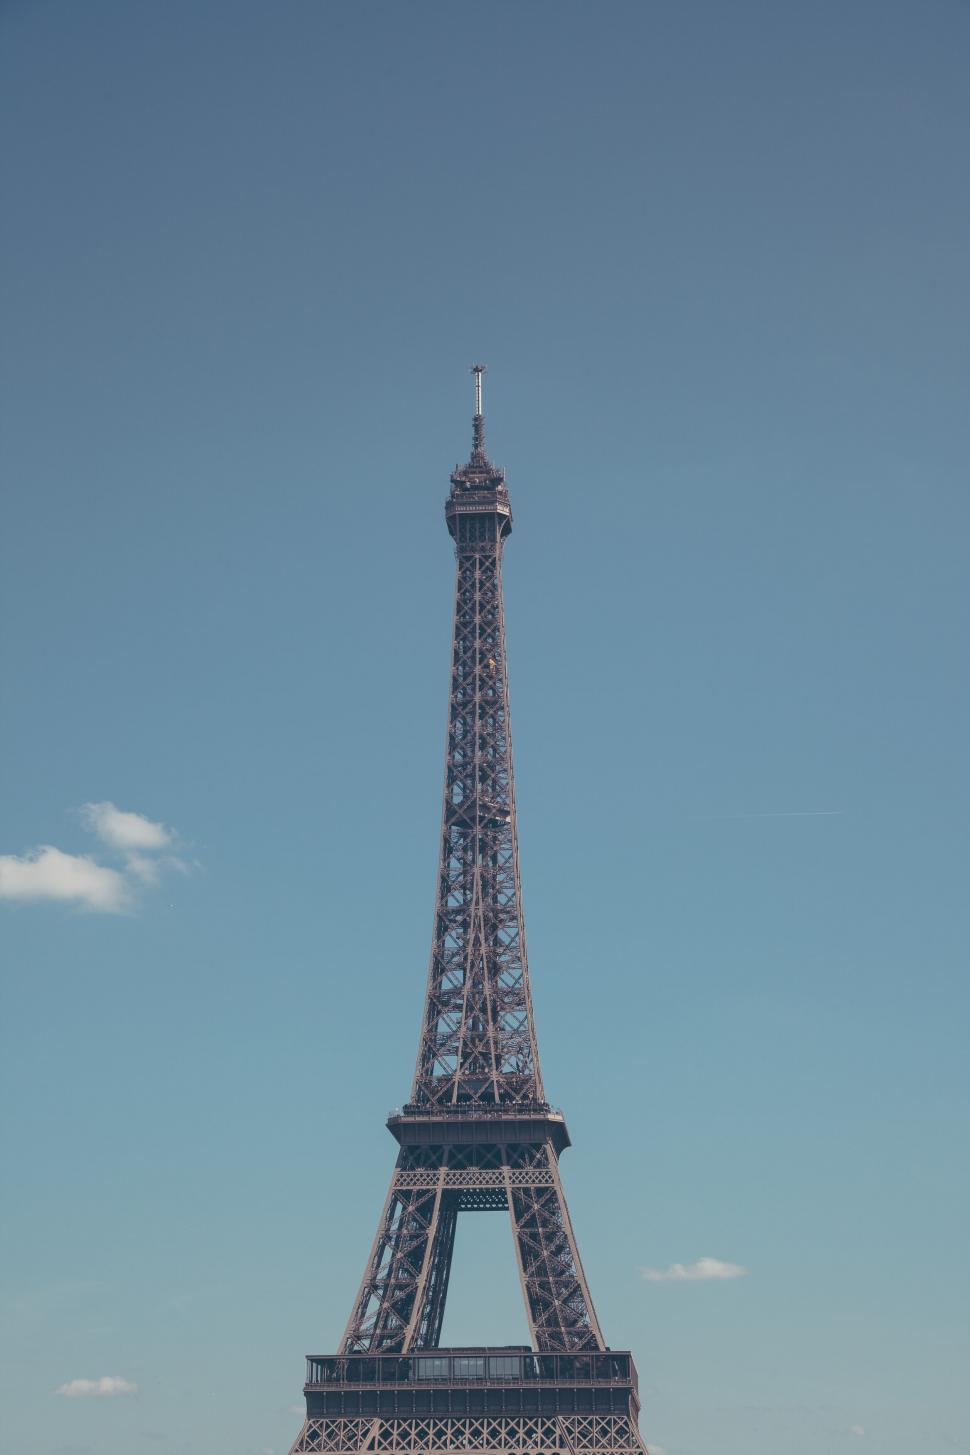 Free Image of A tall tower with a blue sky 